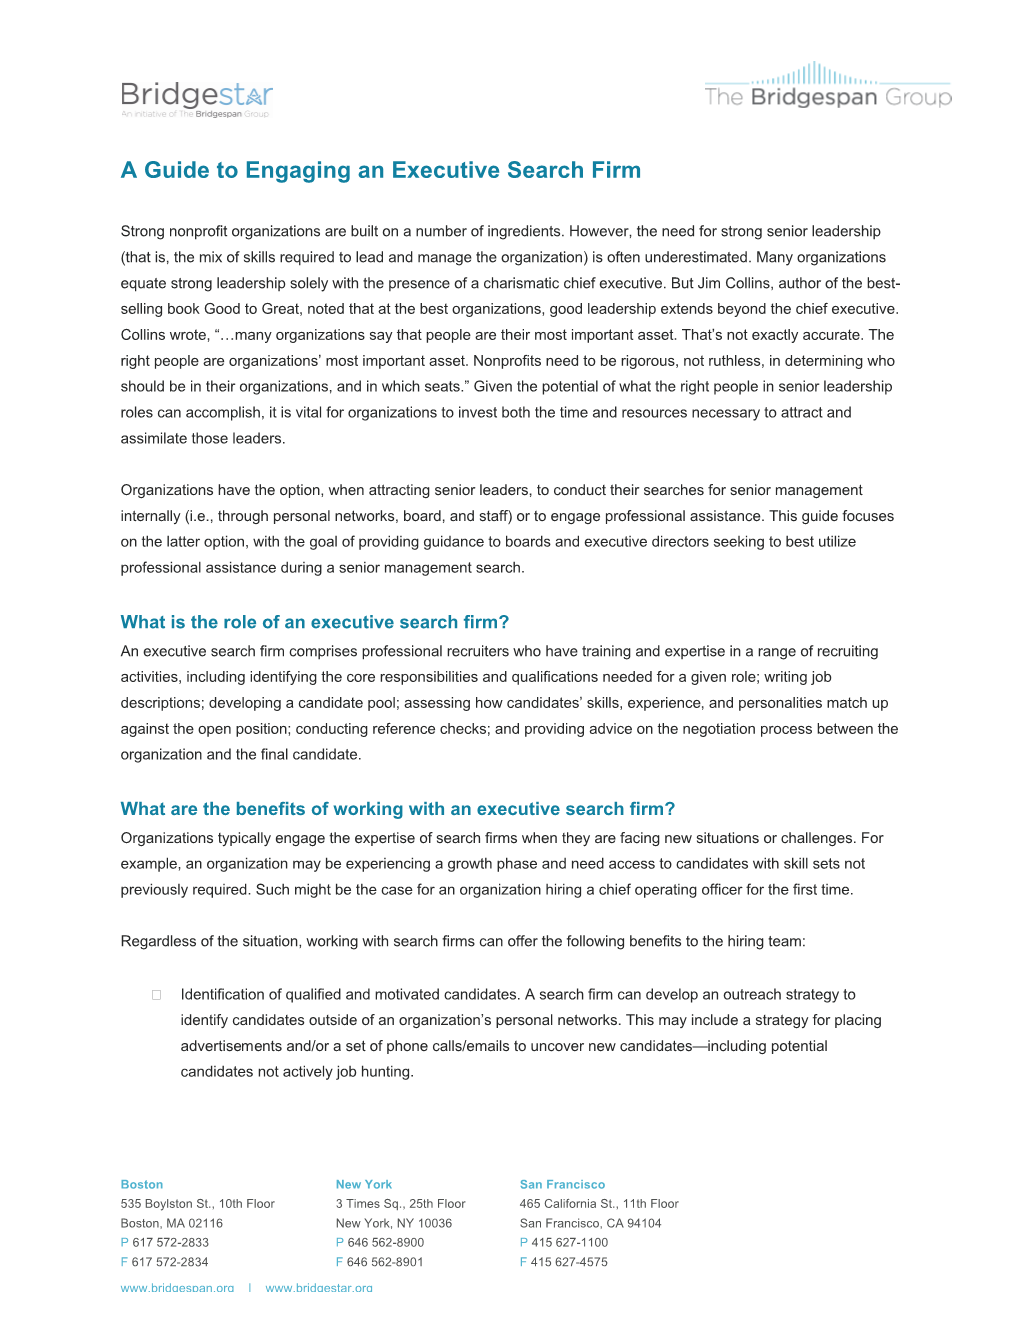 A Guide to Engaging an Executive Search Firm